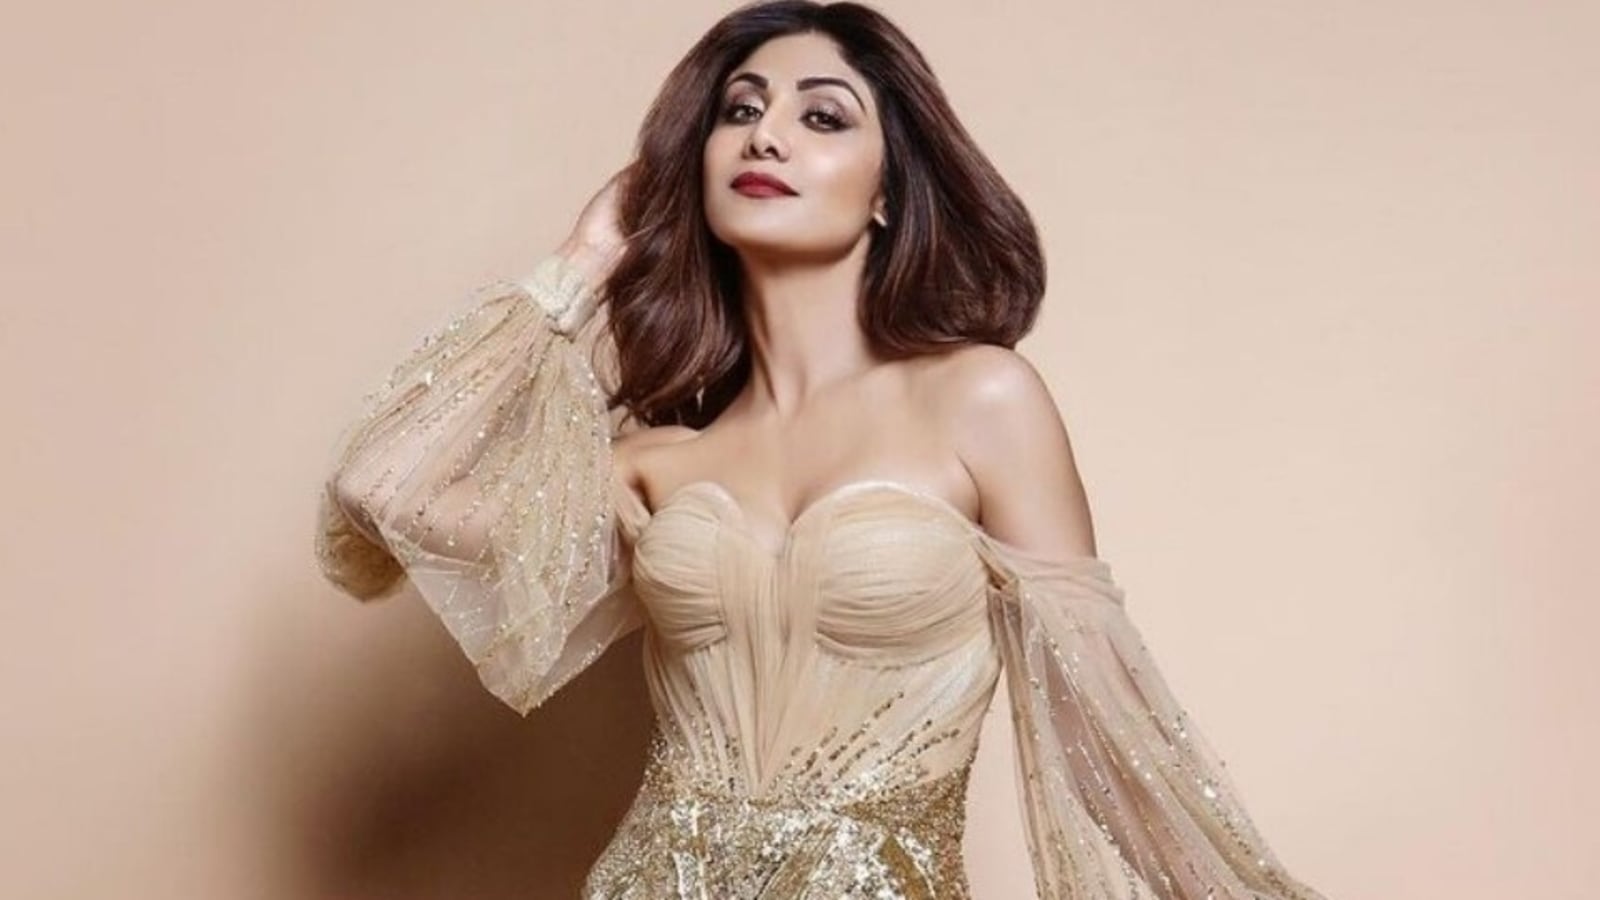 Silpa Xxx Photos Video Hd - Sparkle on, darling: Shilpa Shetty in nude shimmery gown gives us a  retro-chic moment | Fashion Trends - Hindustan Times